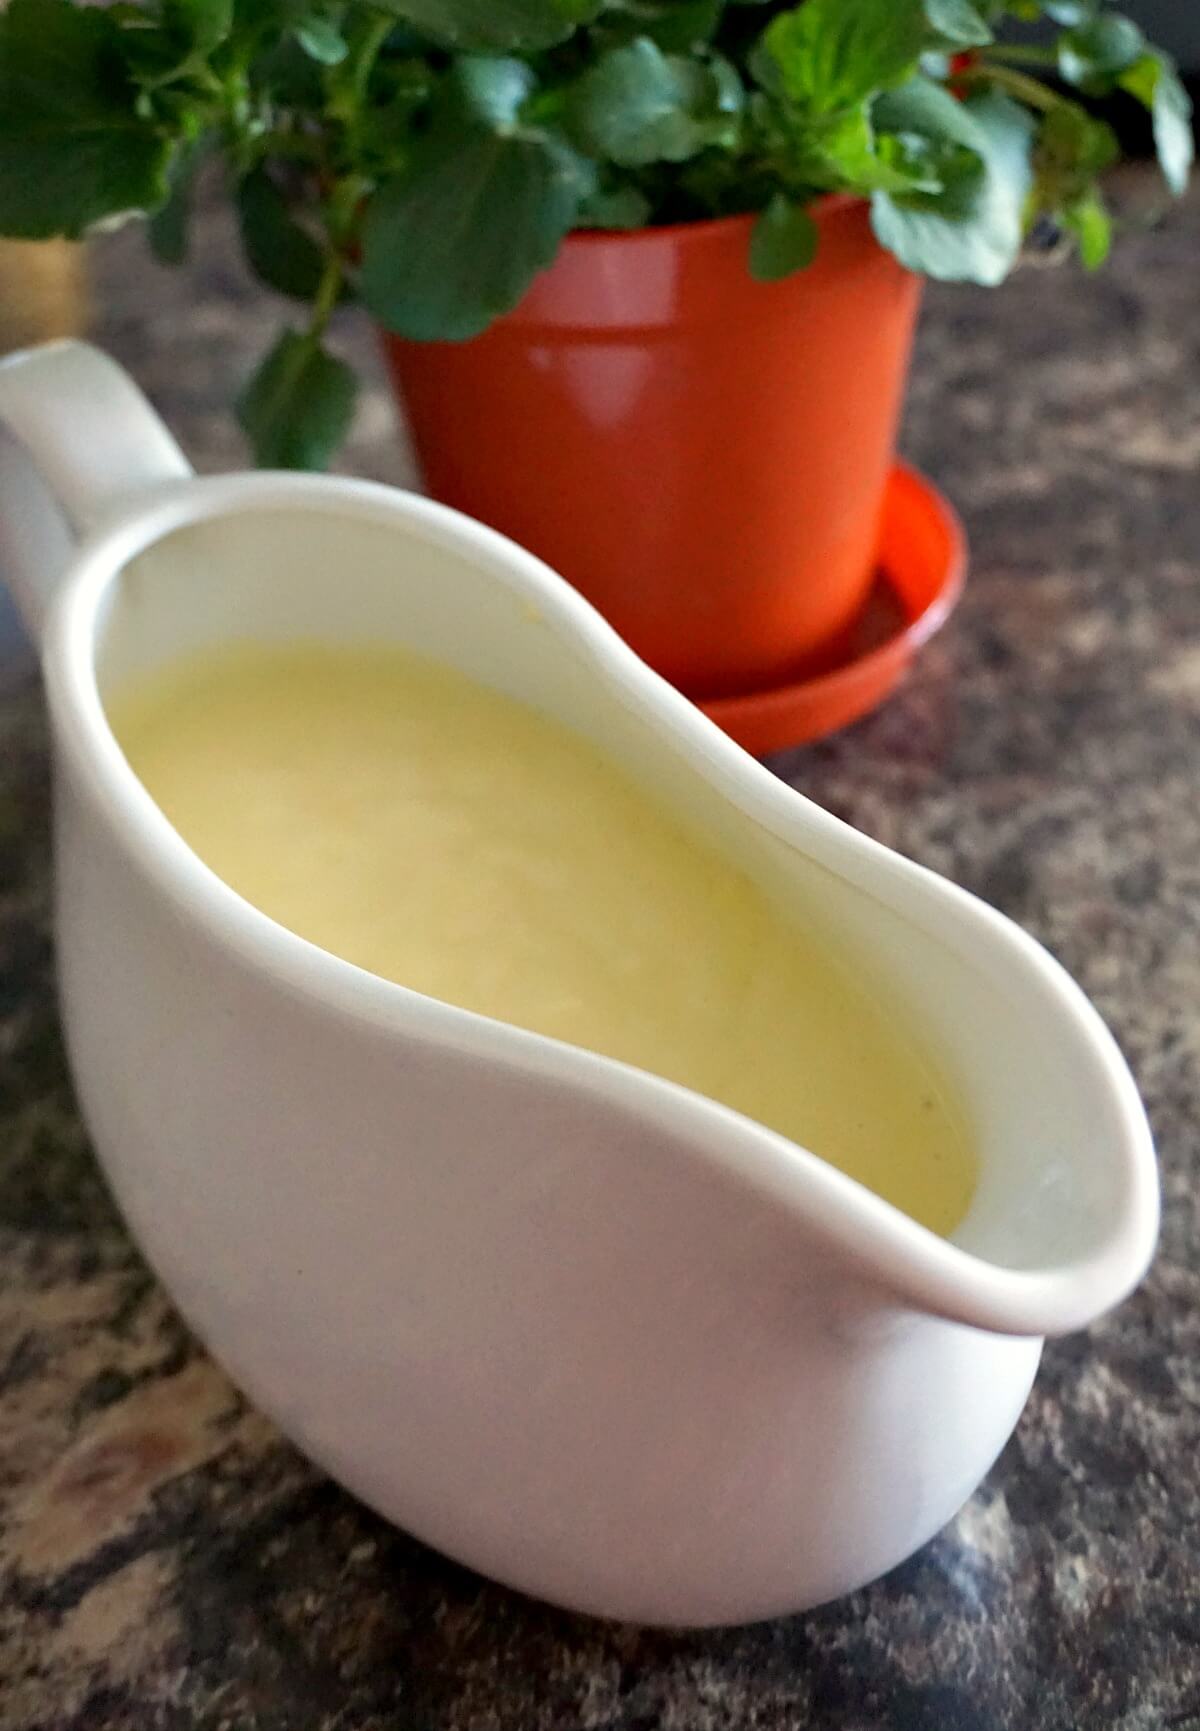 A bowl with homemade custard and a plant behind it.